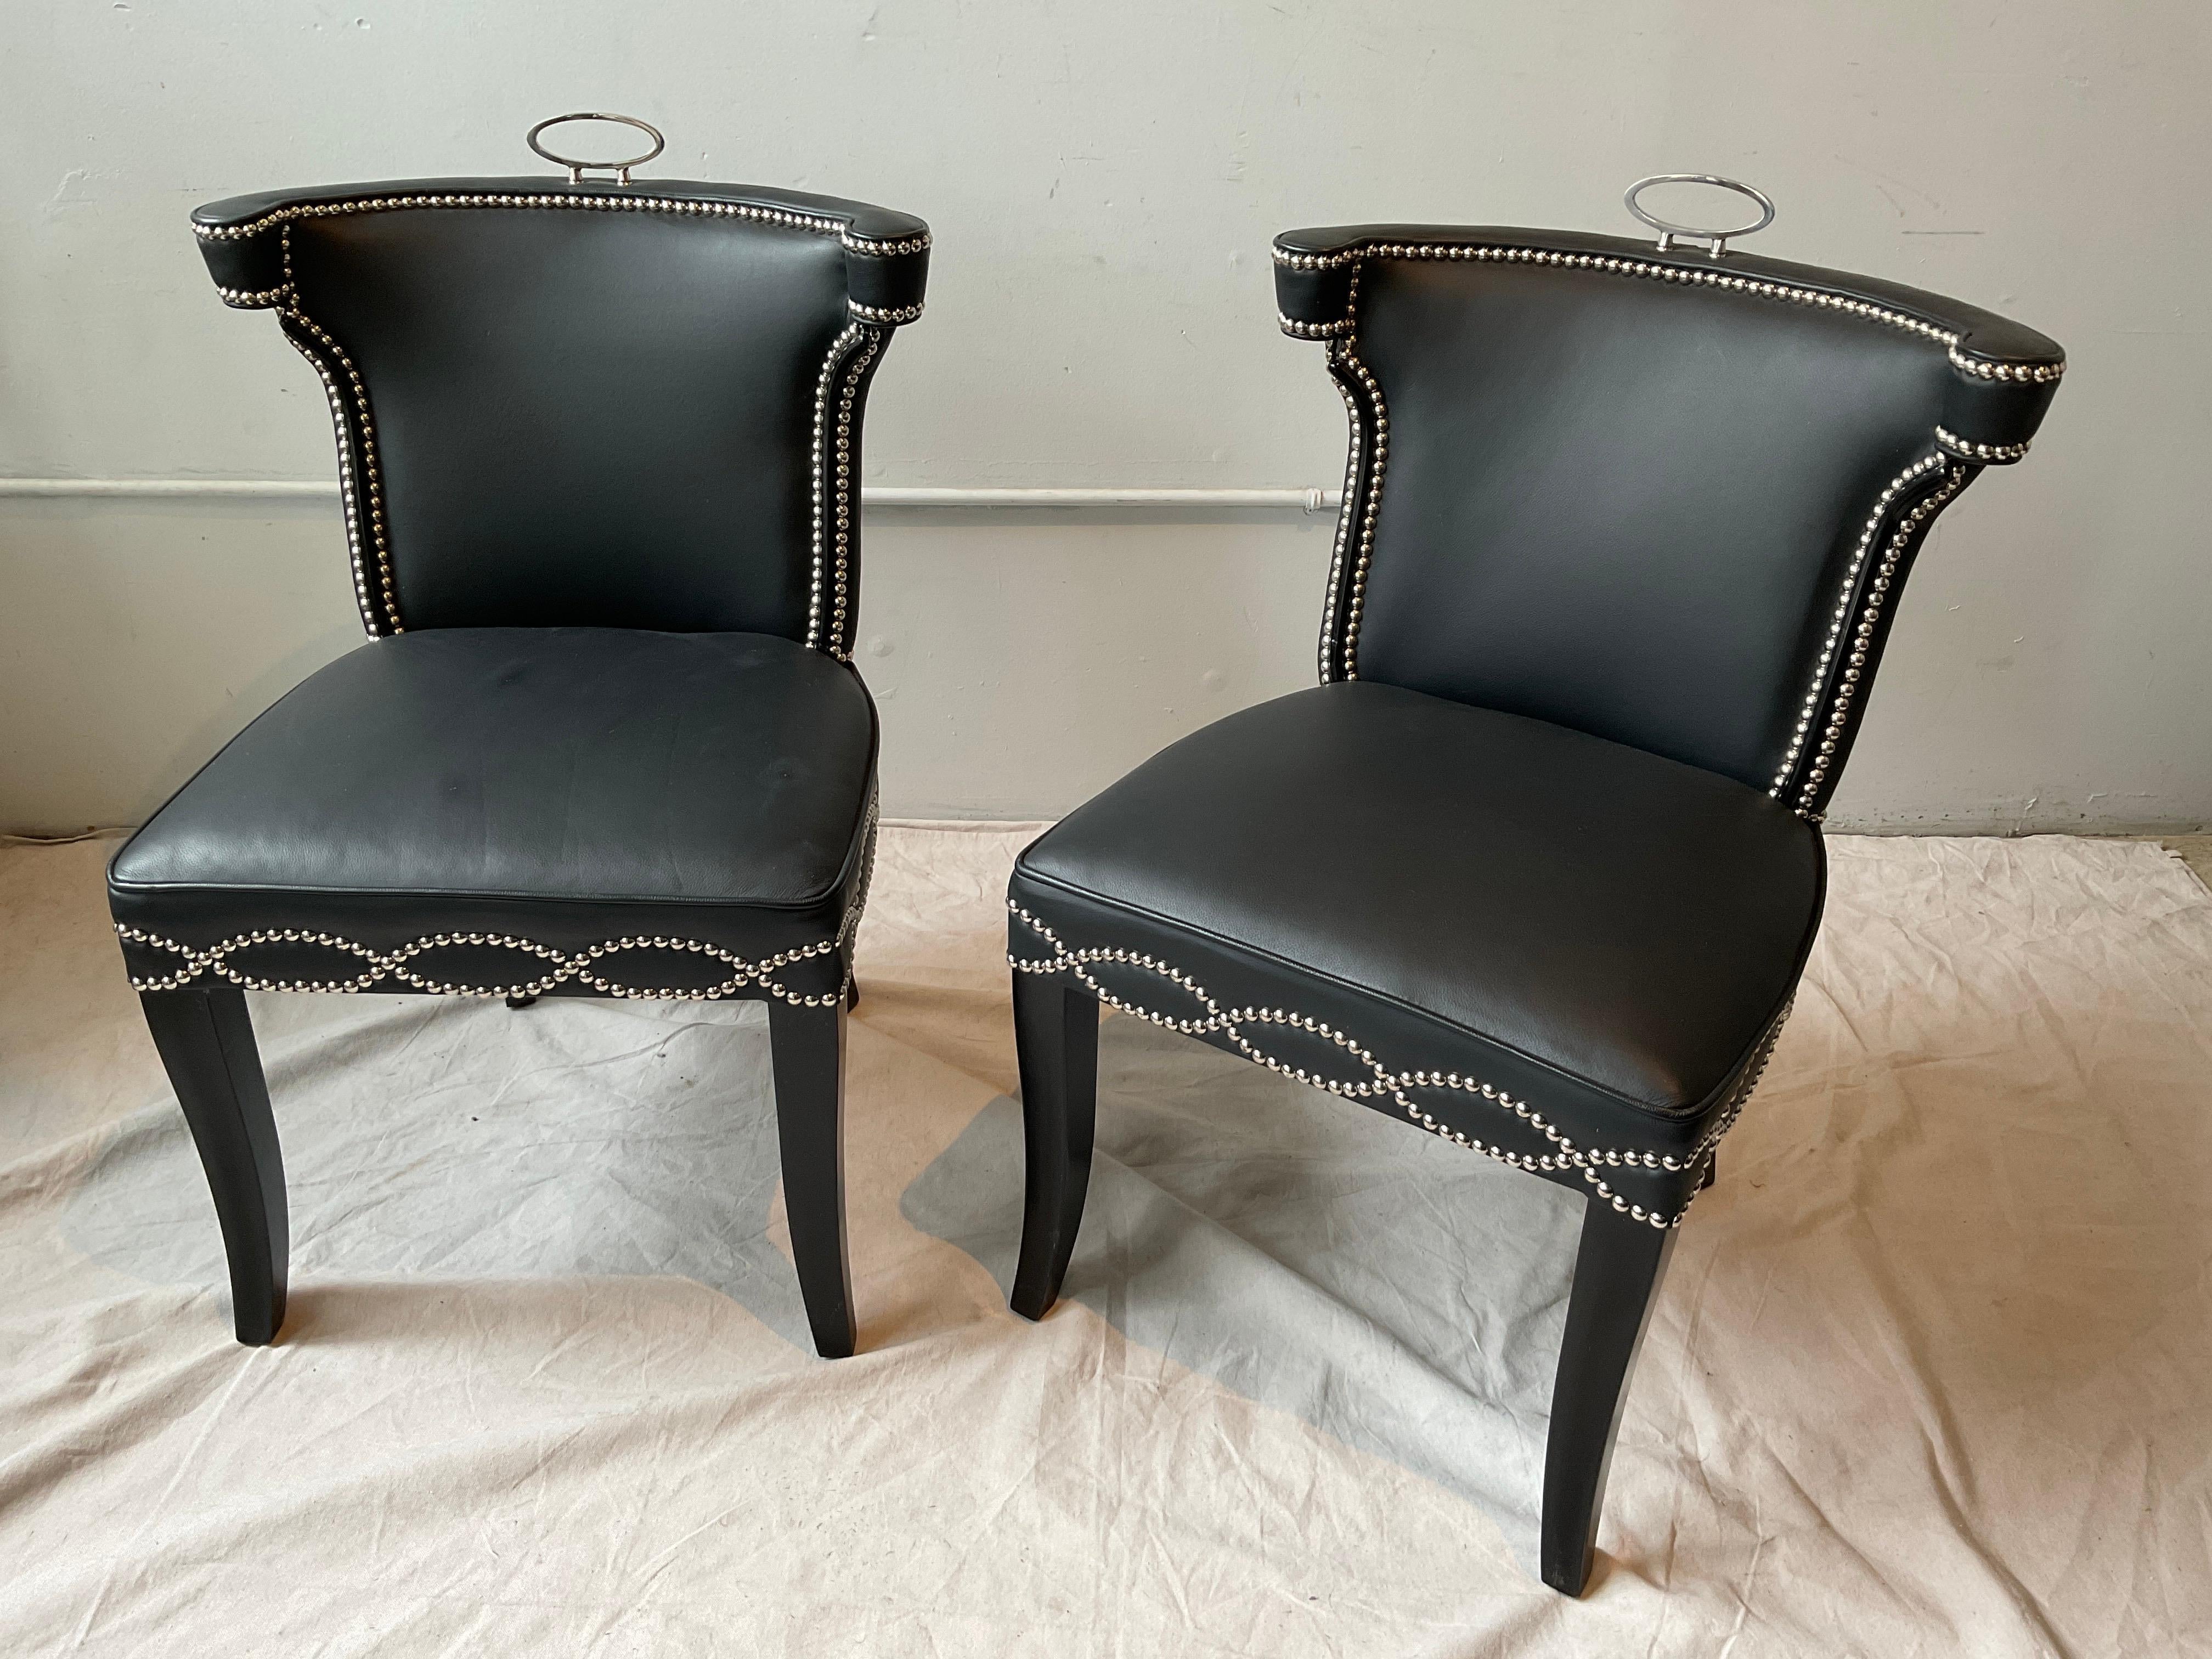 Pair of Global Views Casino black leather chairs.